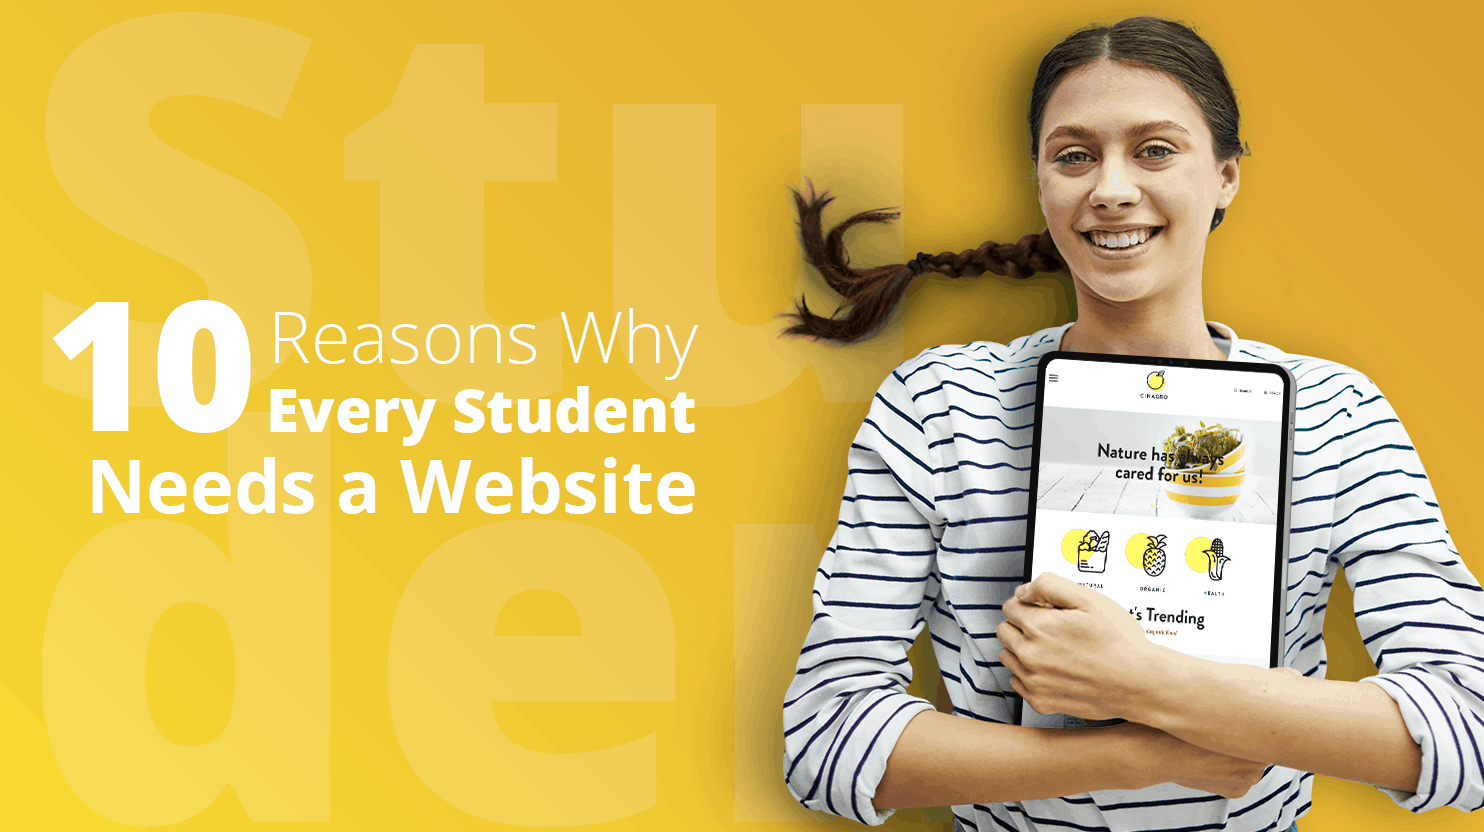 10 Reasons Why Every Student Needs a Website